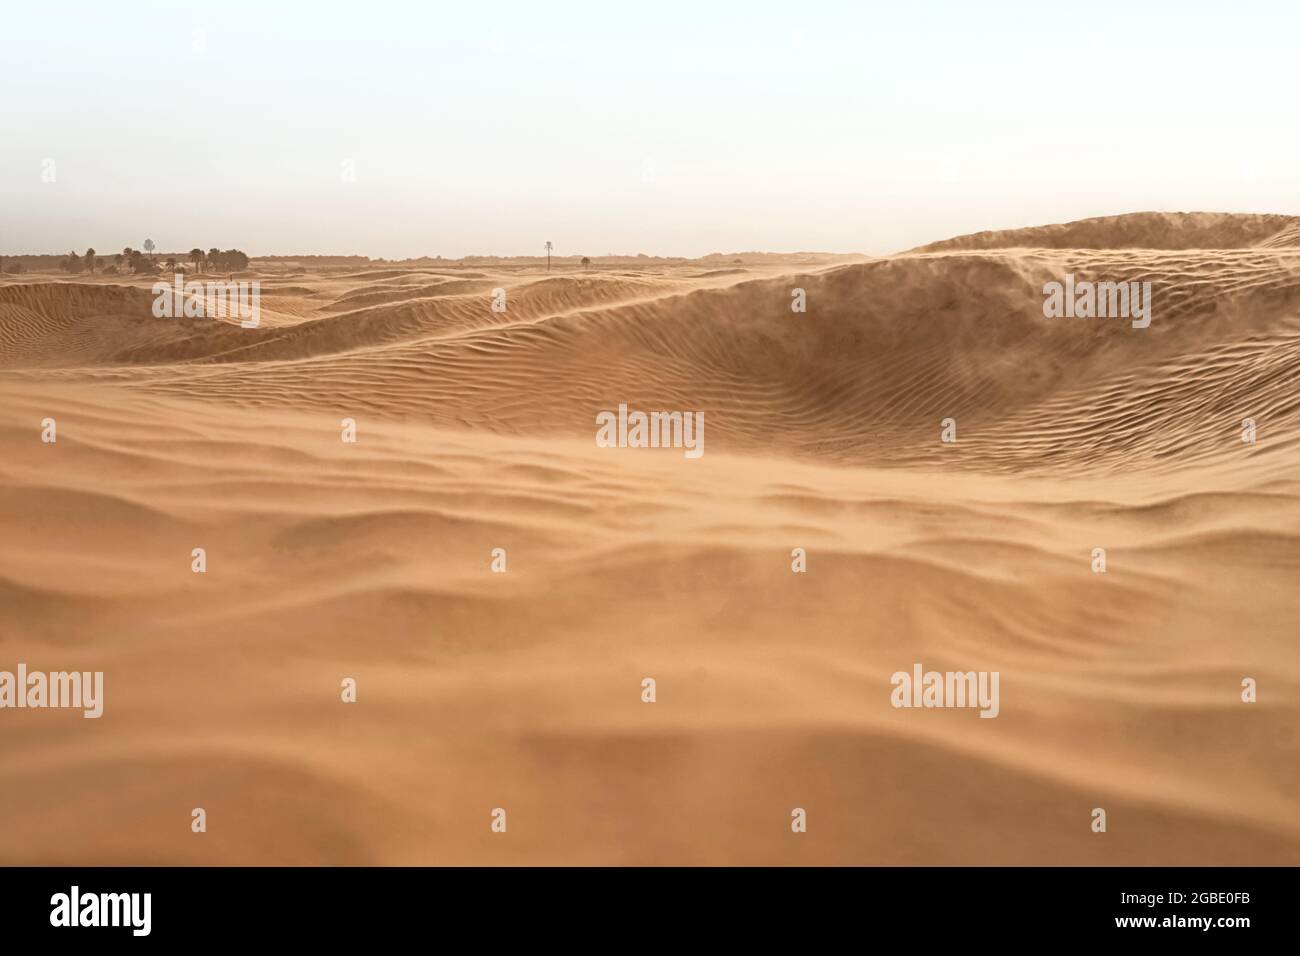 Lonely sand dunes in a strong wind under the sky against the background of arid desert Stock Photo